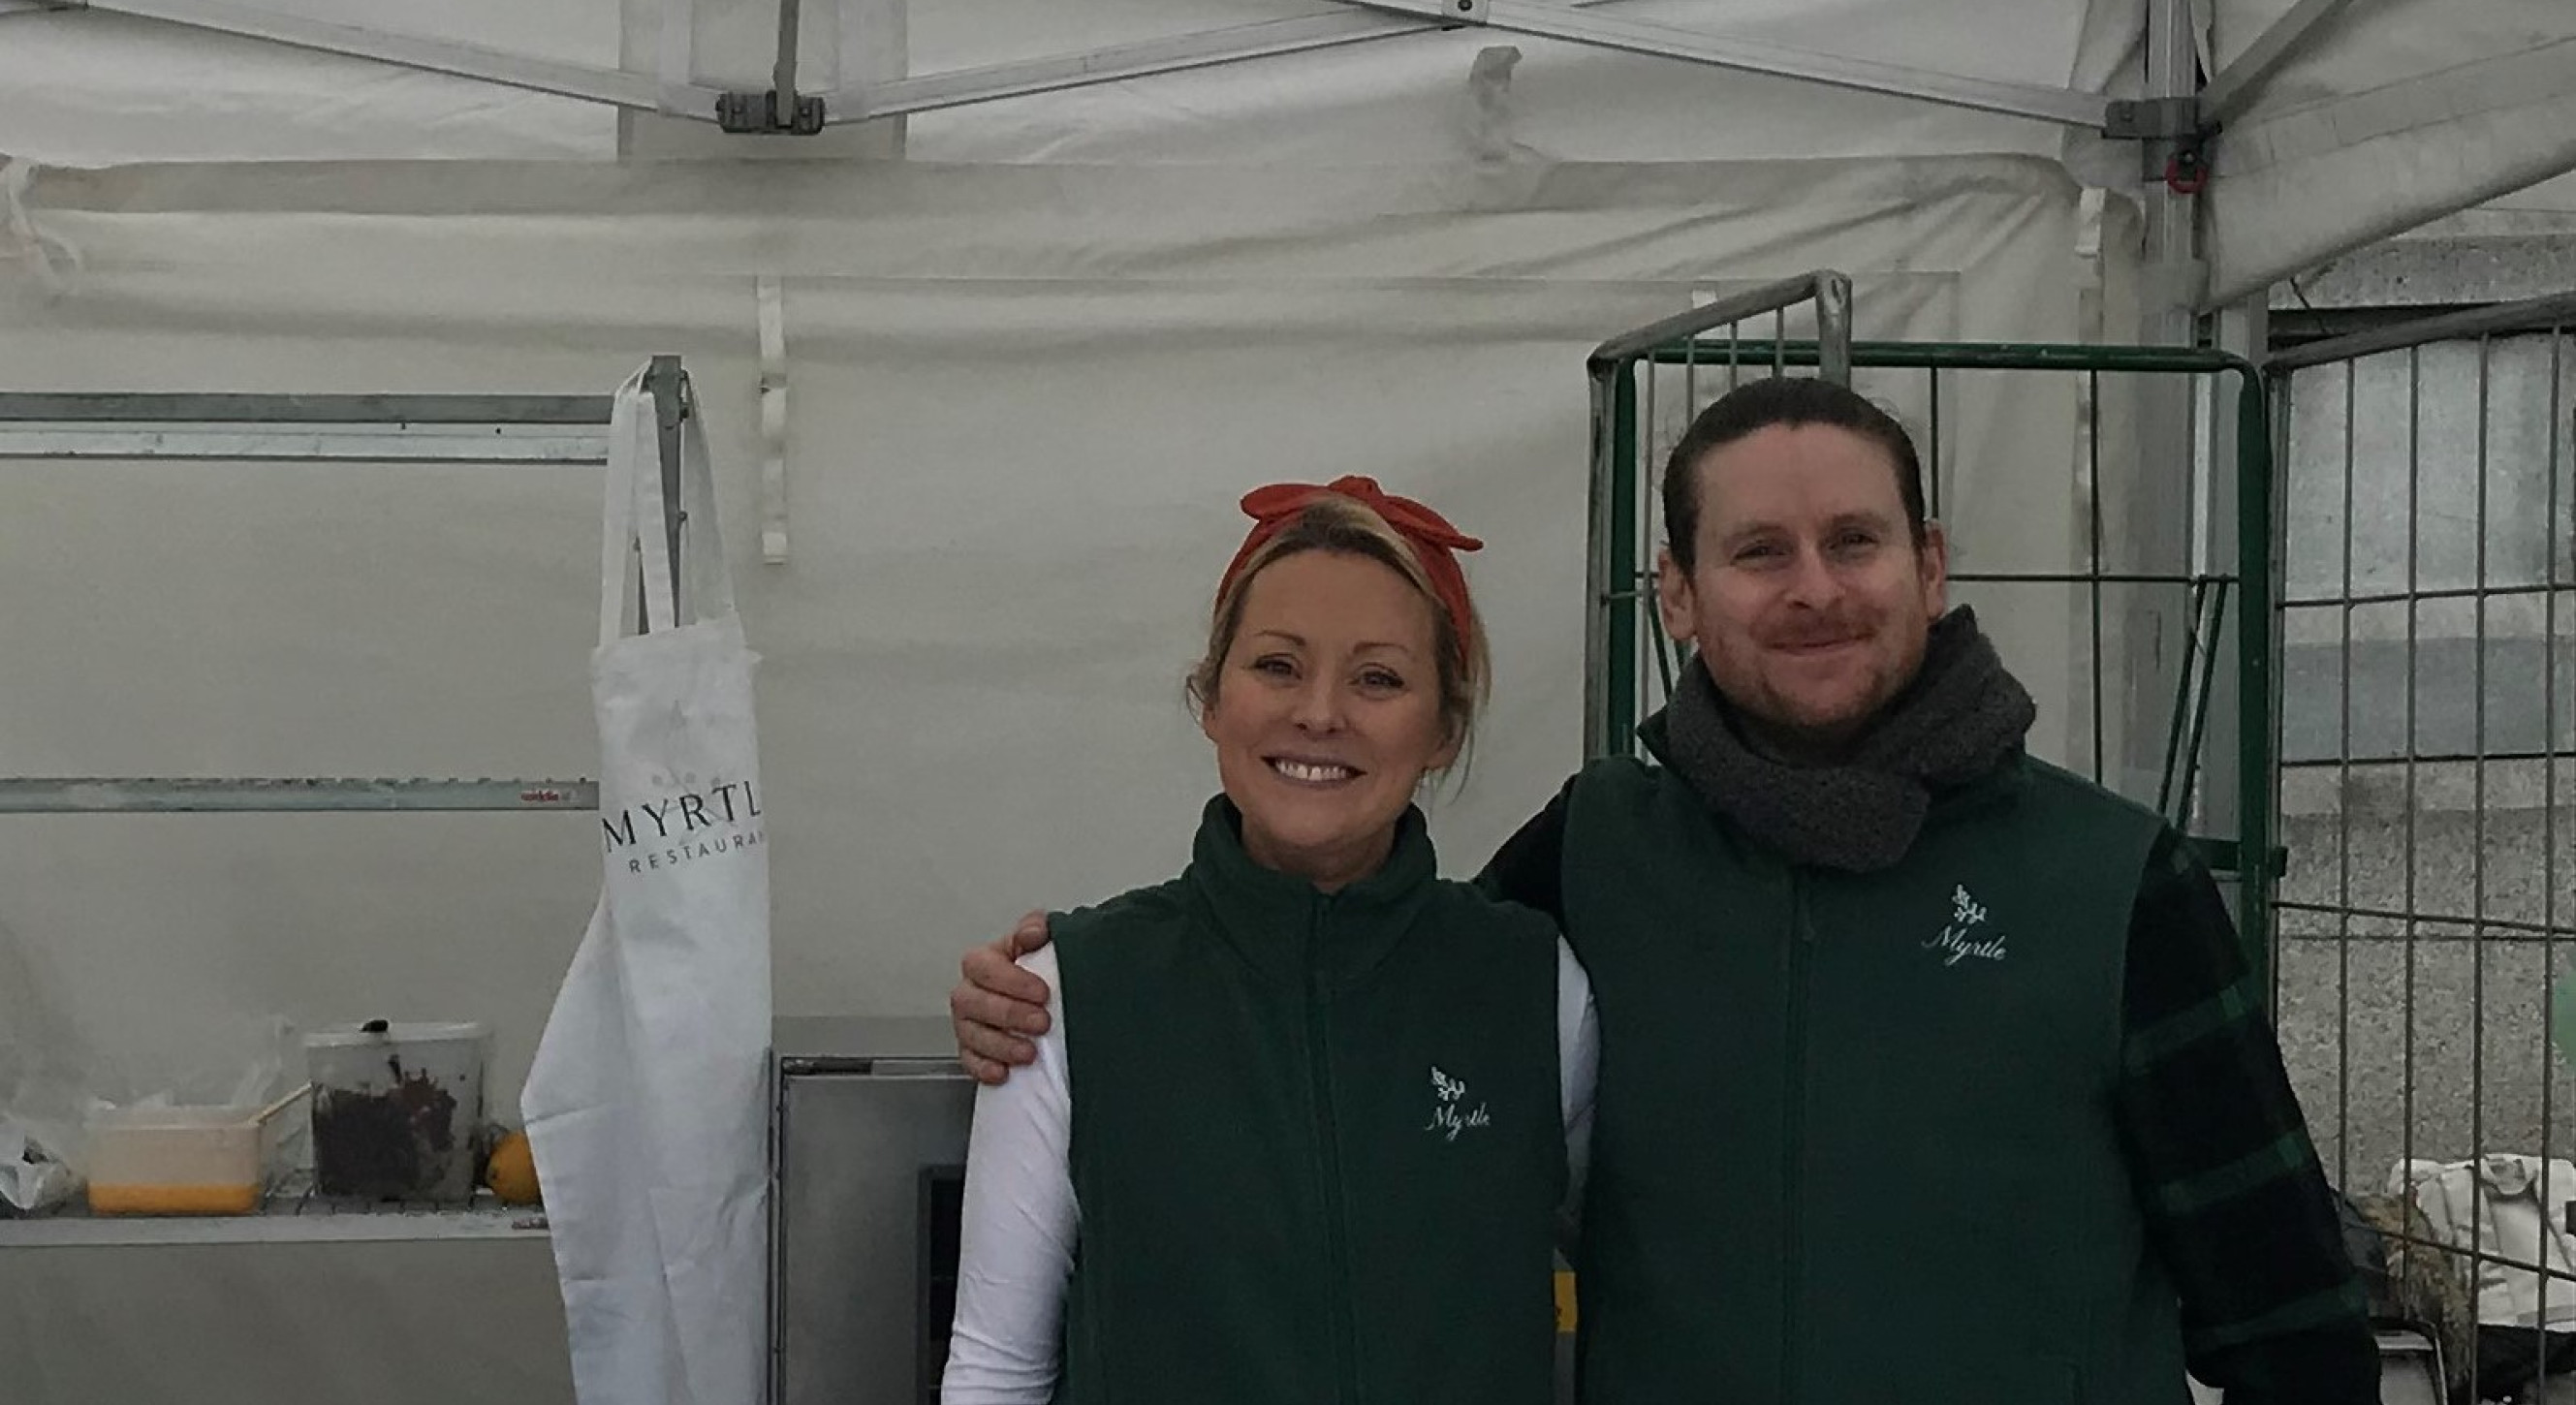 Irish chef, and Masterchef judge, Anna Haugh was rustling up some great food with her team in a pop up in Trafalgar Square